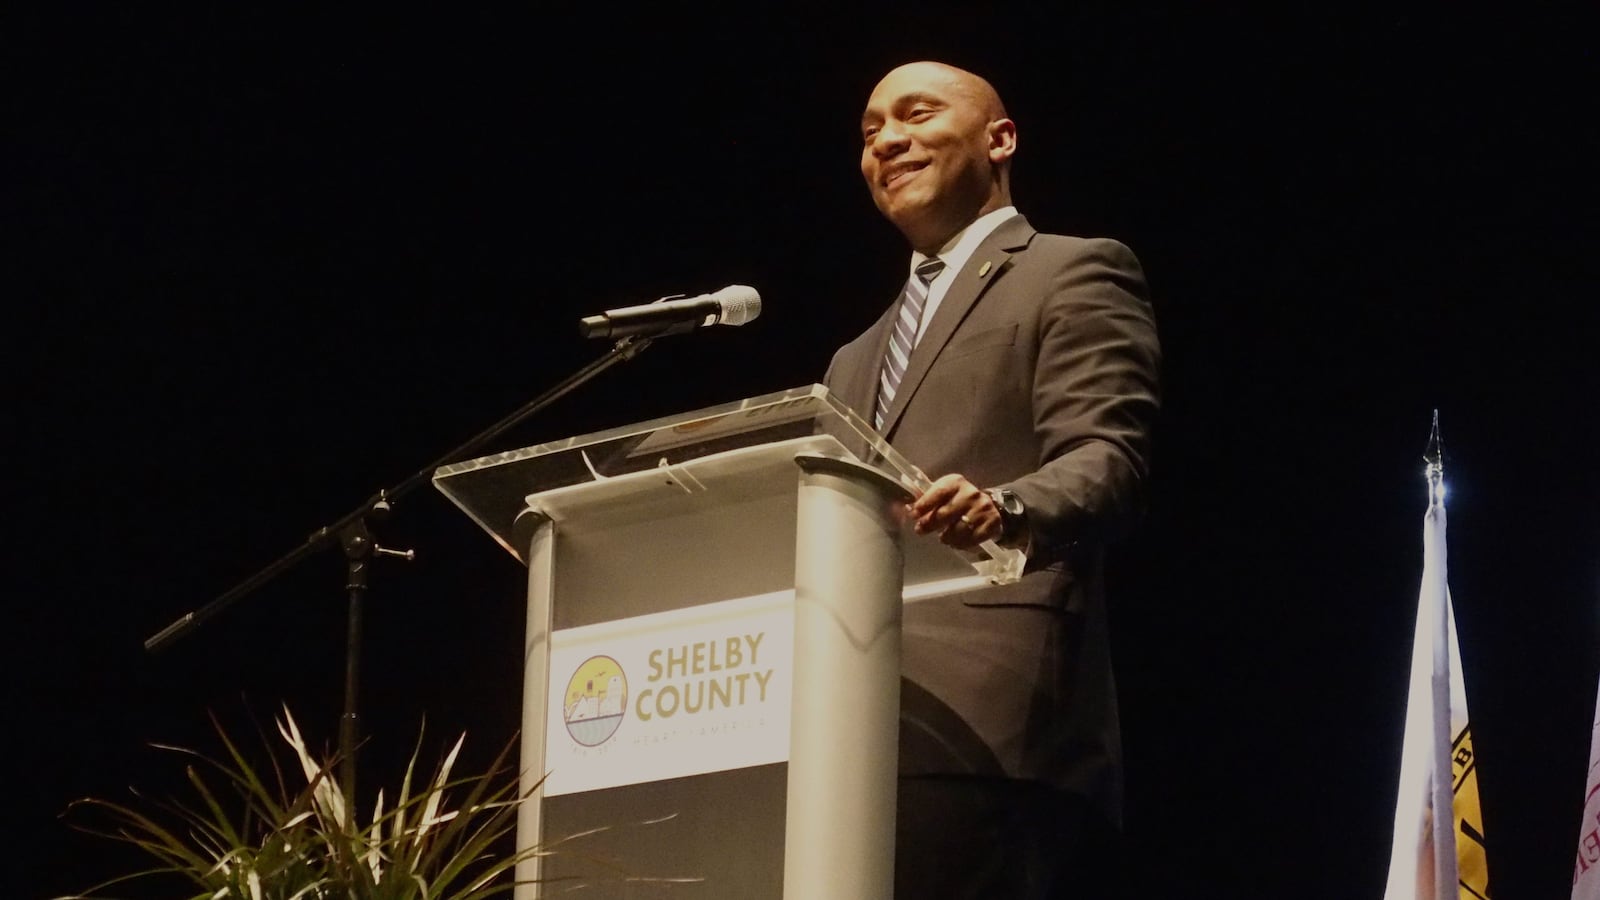 Shelby County Mayor Lee Harris delivers the 2020 county address at Collierville High School on Feb. 21.